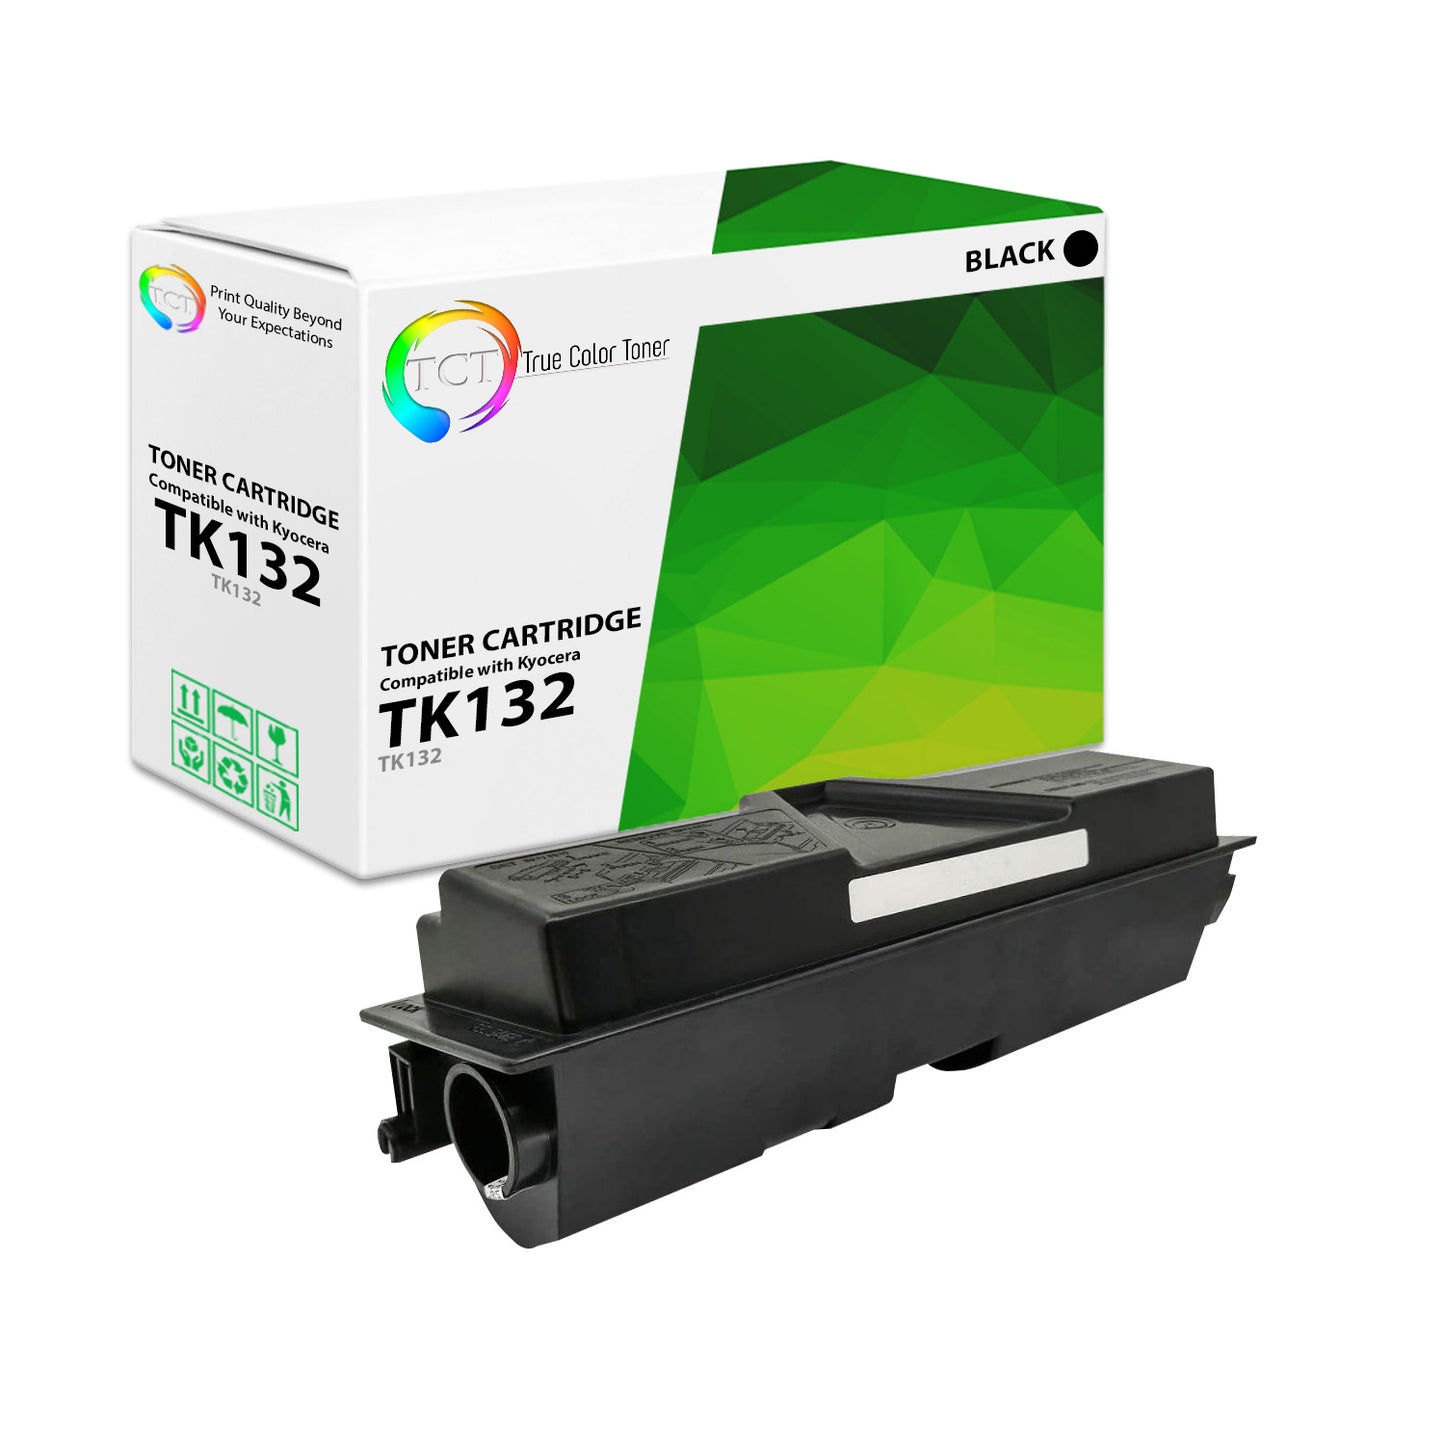 TCT Compatible Toner Cartridge Replacement for the Kyocera TK-132 Series - 1 Pack Black